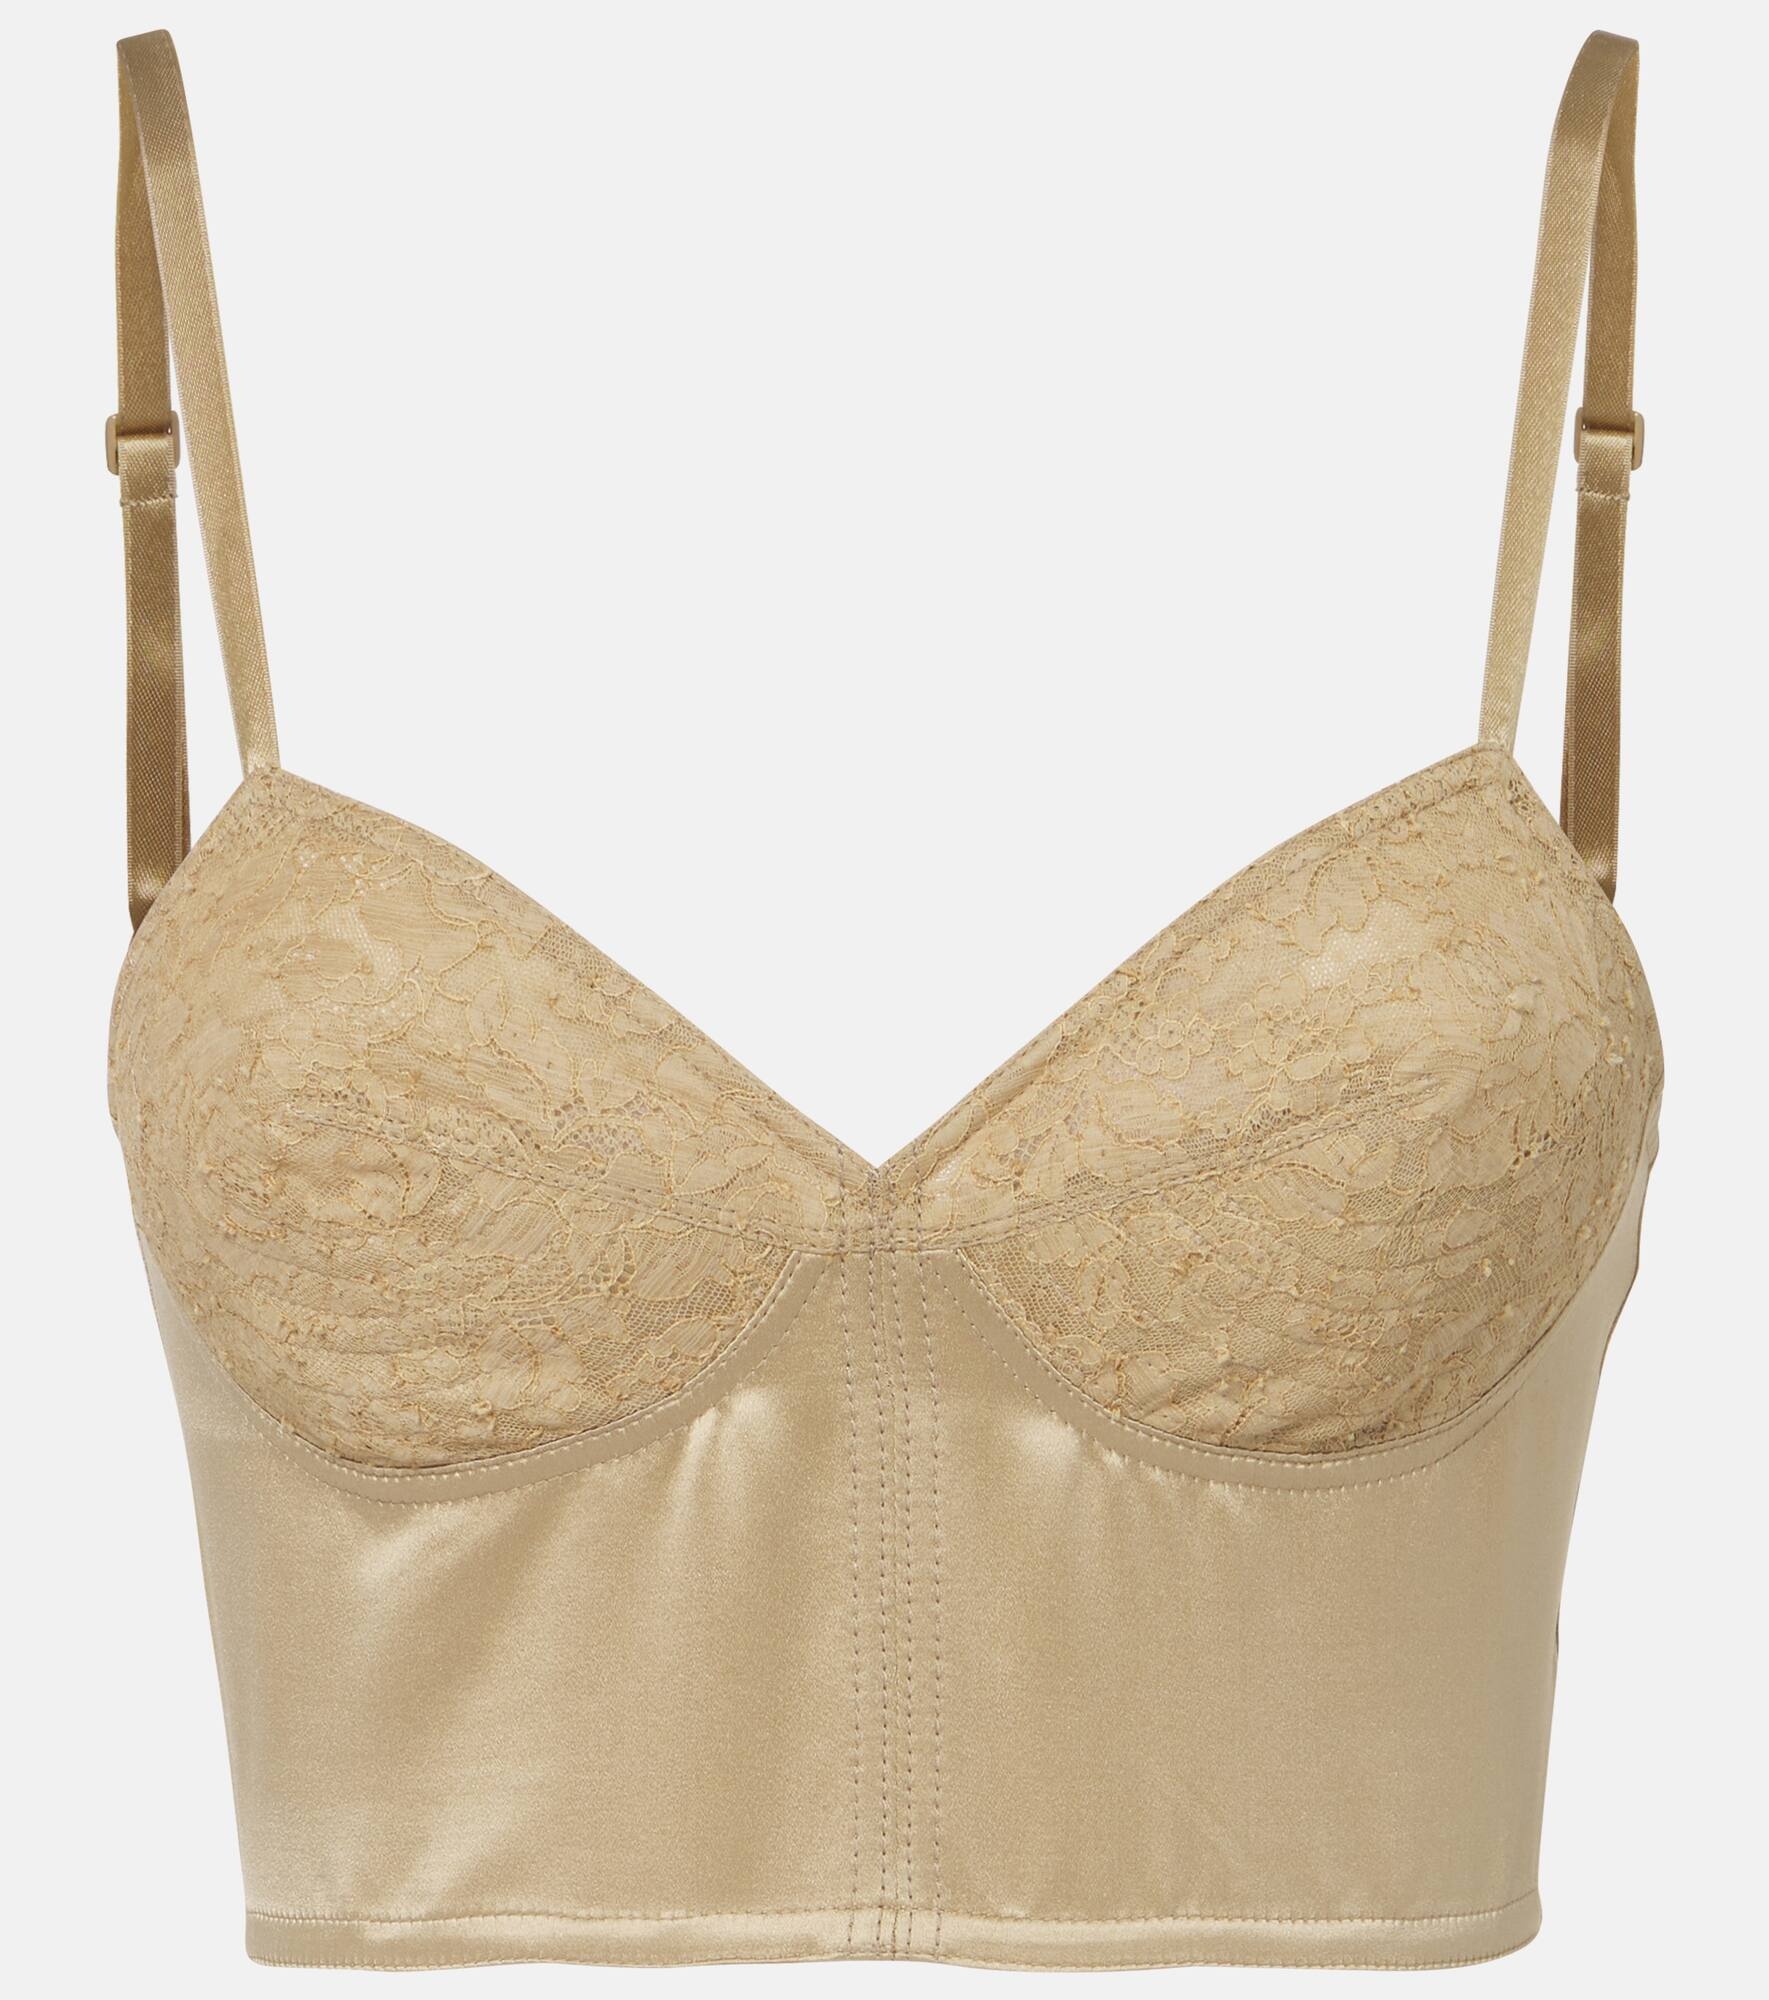 Embroidered cotton and silk bustier - 1